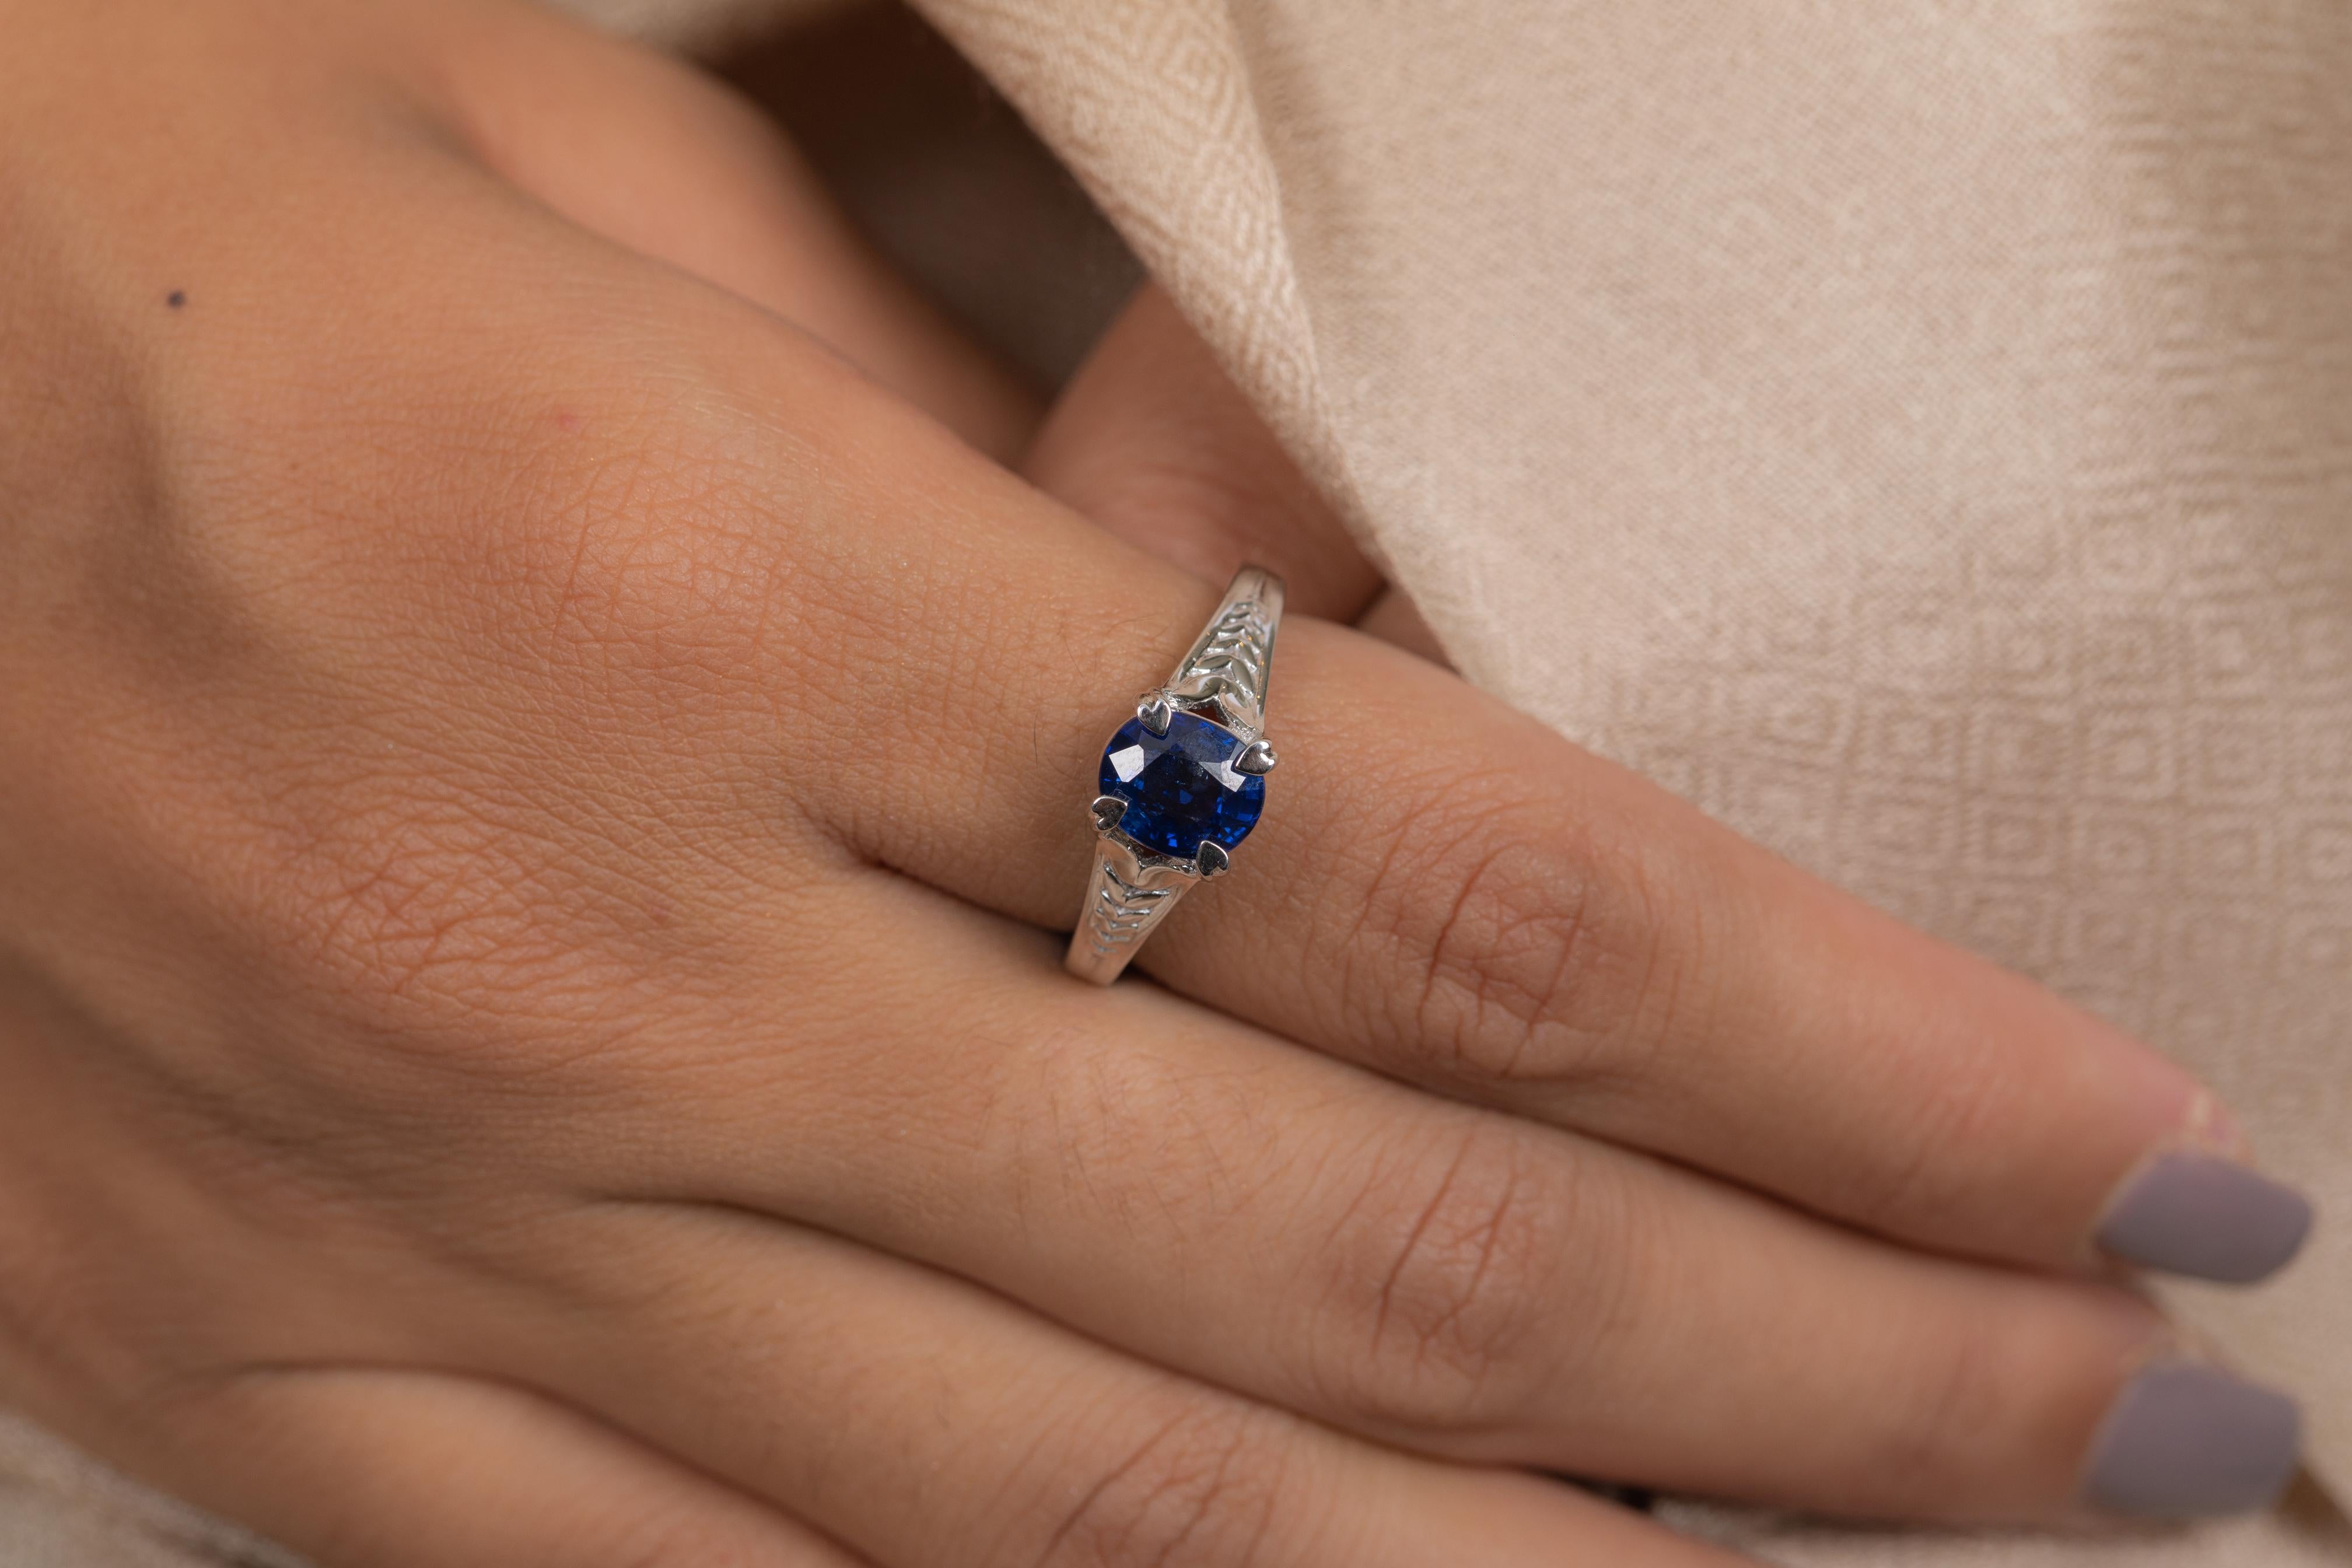 Blue Sapphire Ring 18K Gold featuring natural sapphire of 1.85 carats. The gorgeous handcrafted Ring goes with every style.
Sapphire stimulate concentration and reduces stress.
Designed with oval cut sapphire with designer shank that makes it a